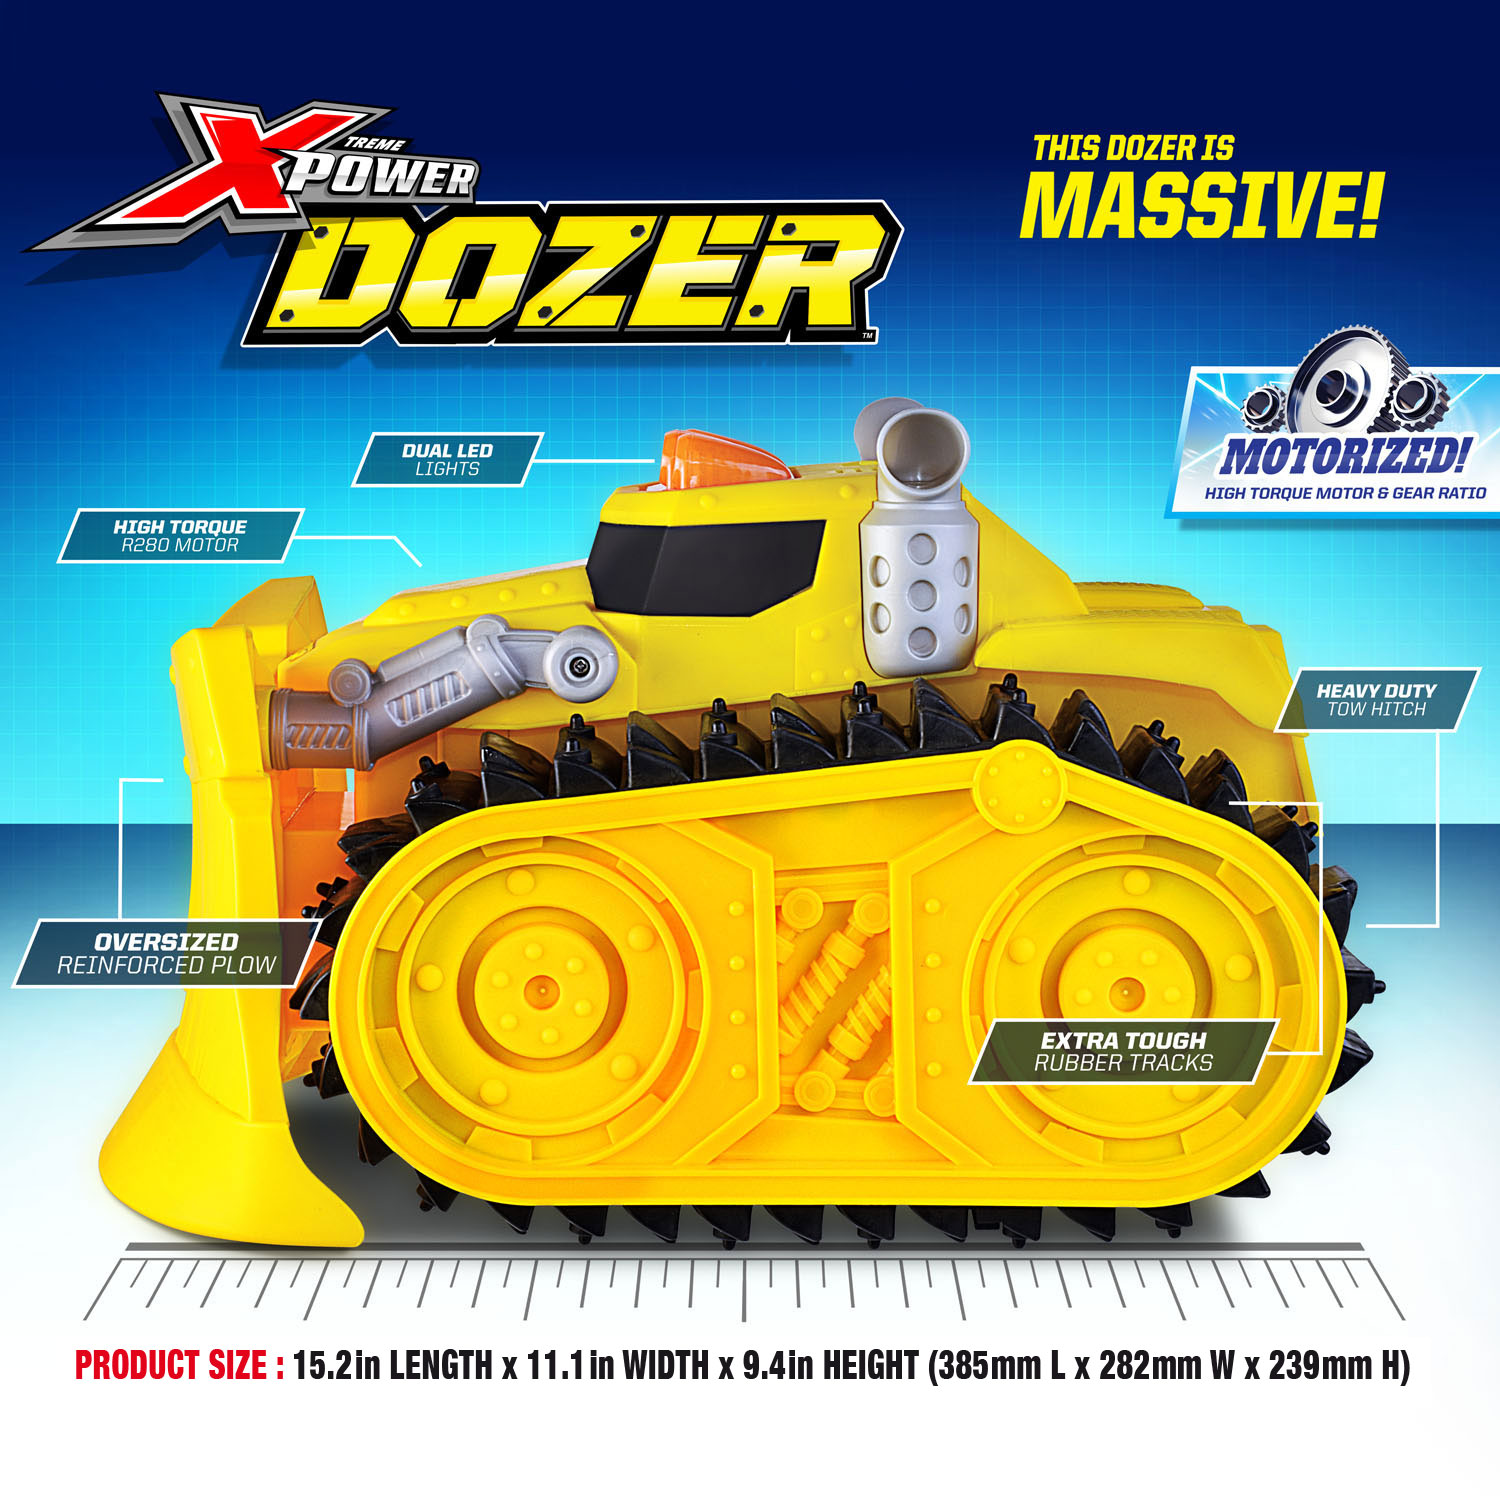 Xtreme Power Dozer - Motorized Extreme Bulldozer Toy Truck for Toddler Boys & Kids Who Love Construction ToysPlow Through Dirt, Toys, Wood, Rocks-Indoor & Outdoor Play-Spring Summer Fall Winter - image 2 of 9